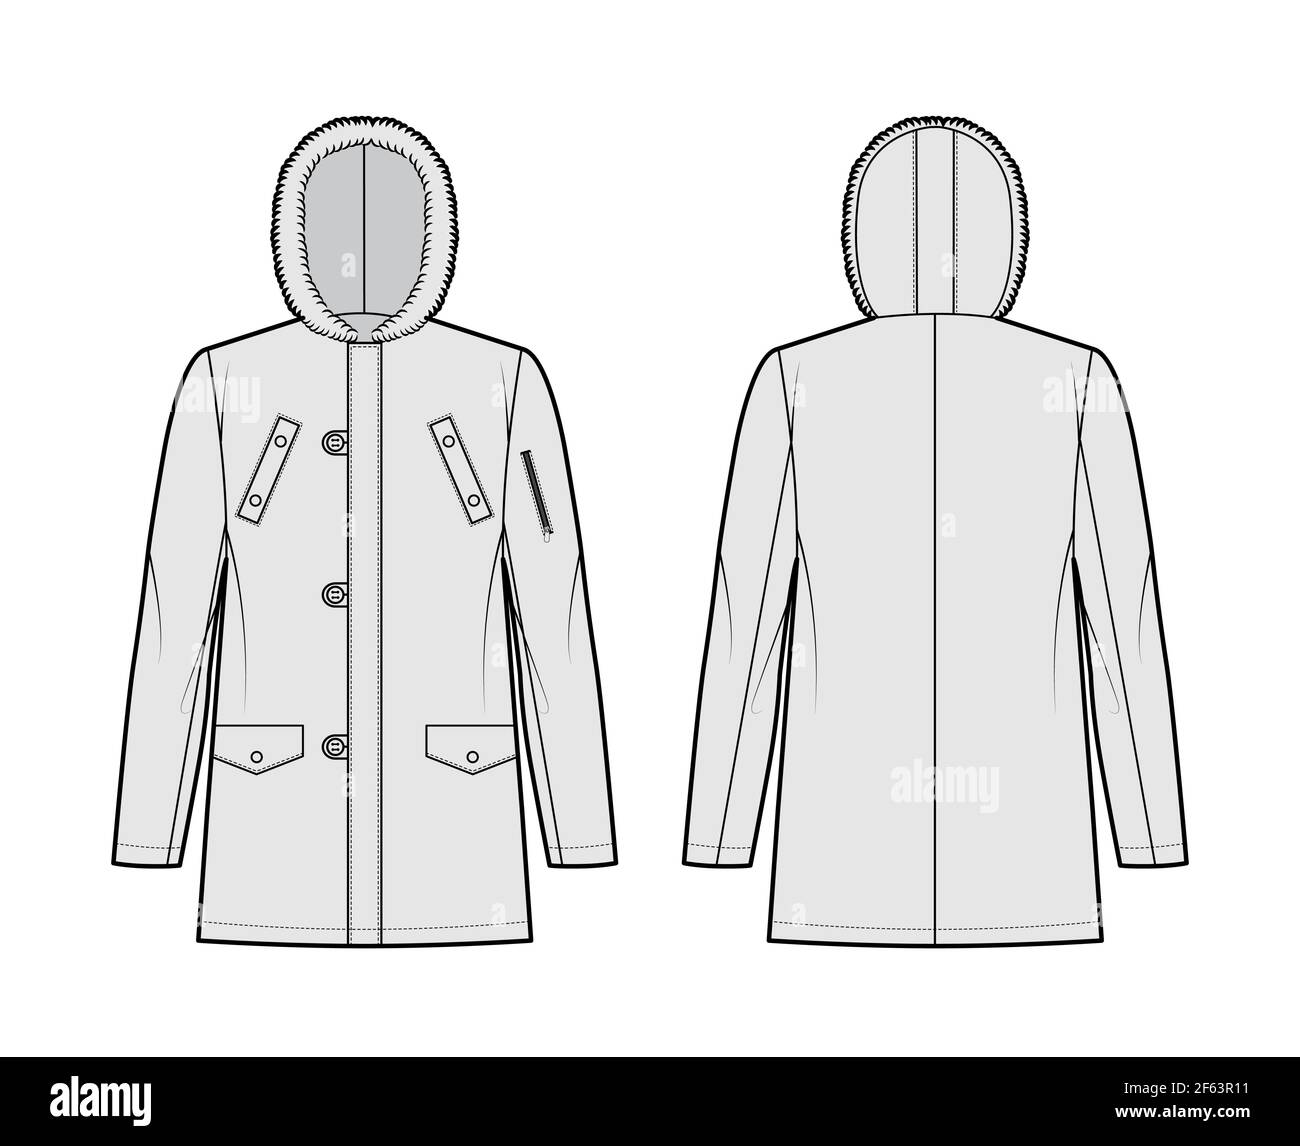 N-3B flight parka technical fashion illustration with oversized, fur hood, long sleeves, pockets, button loop opening. Flat coat template front, back grey color style. Women men unisex top CAD mockup Stock Vector